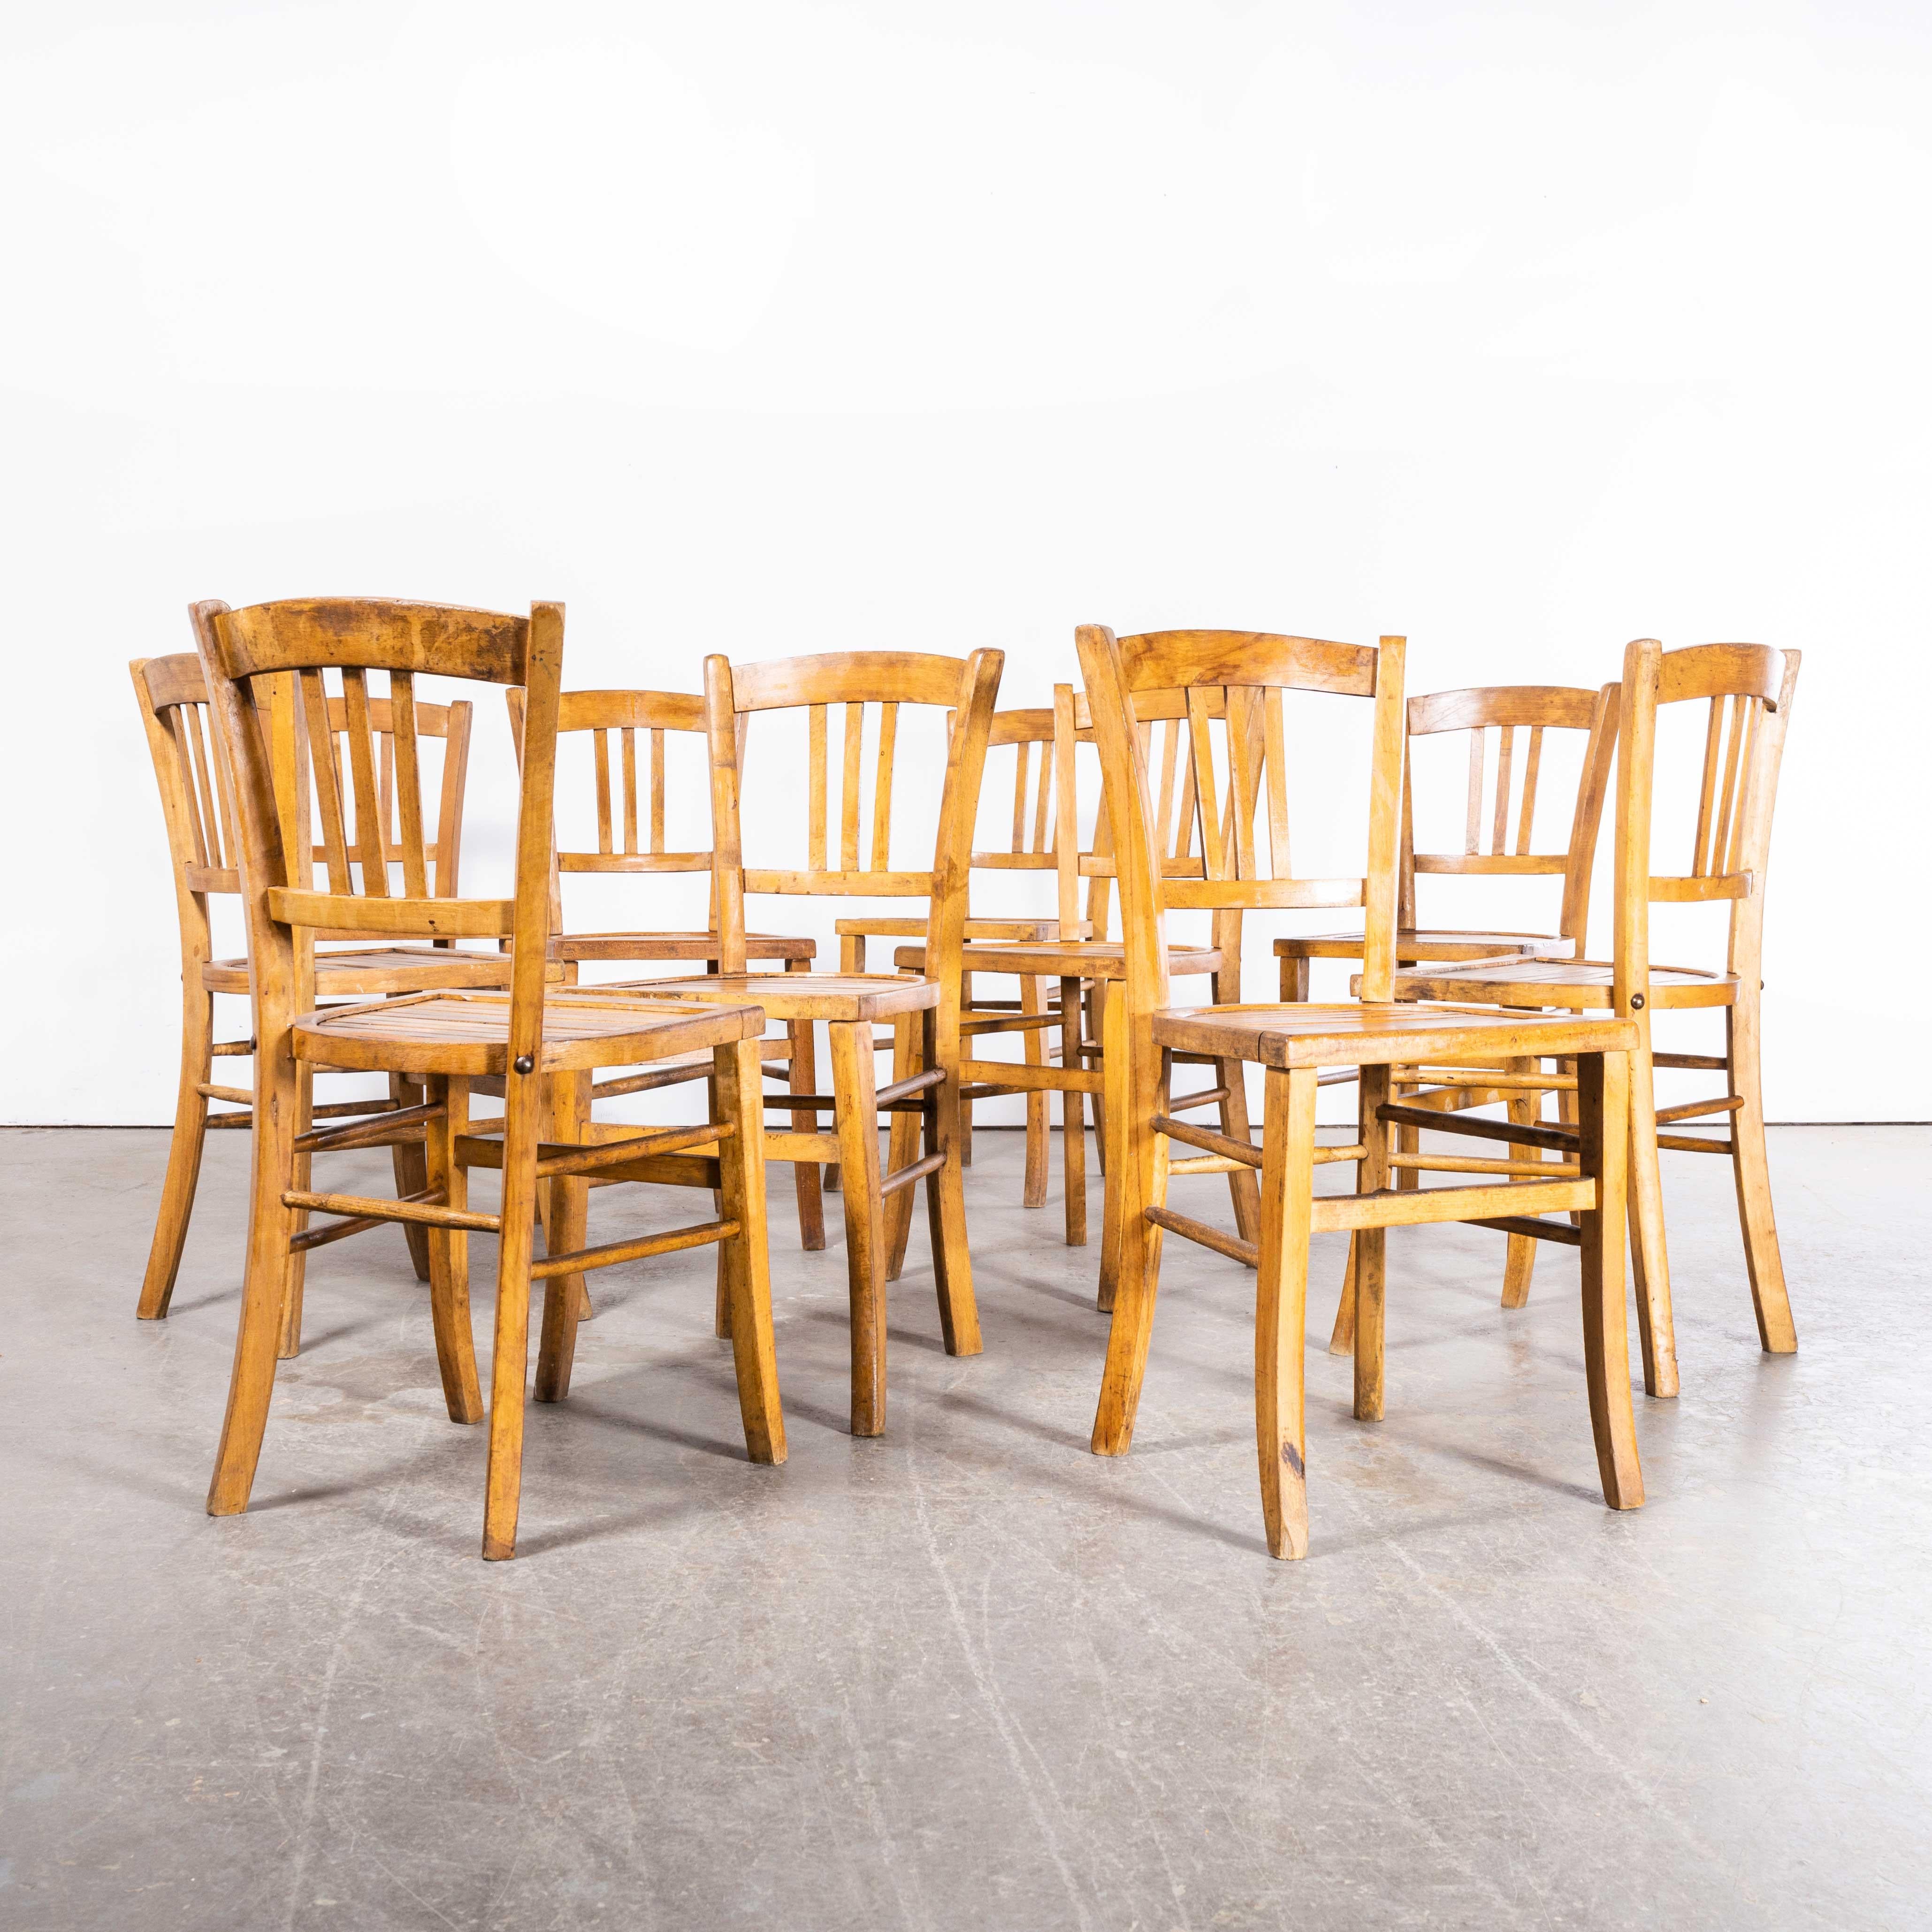 1950's Original French Slatted Farmhouse Chairs From Provence - Set Of Ten In Good Condition For Sale In Hook, Hampshire